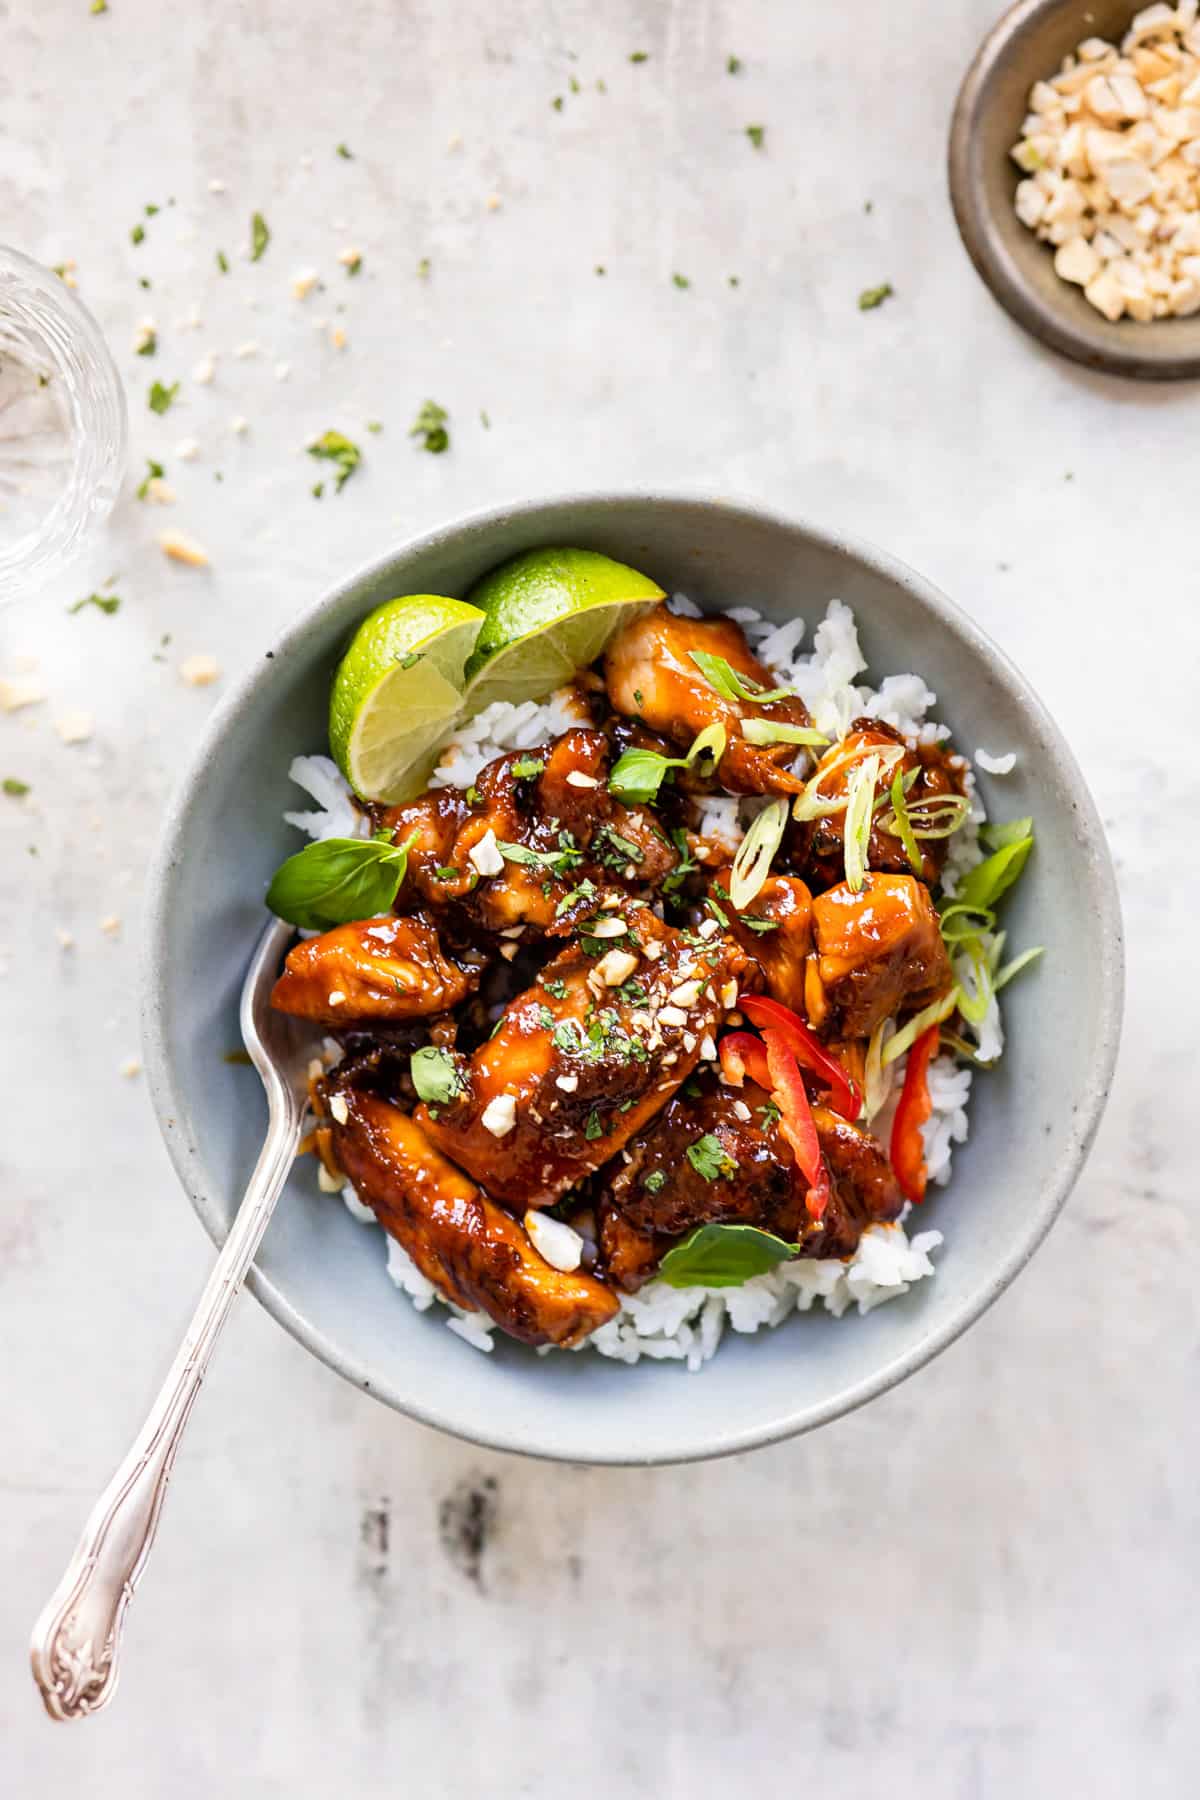 Crispy chilli chicken on a bed of rice with limes and chopped peanuts.